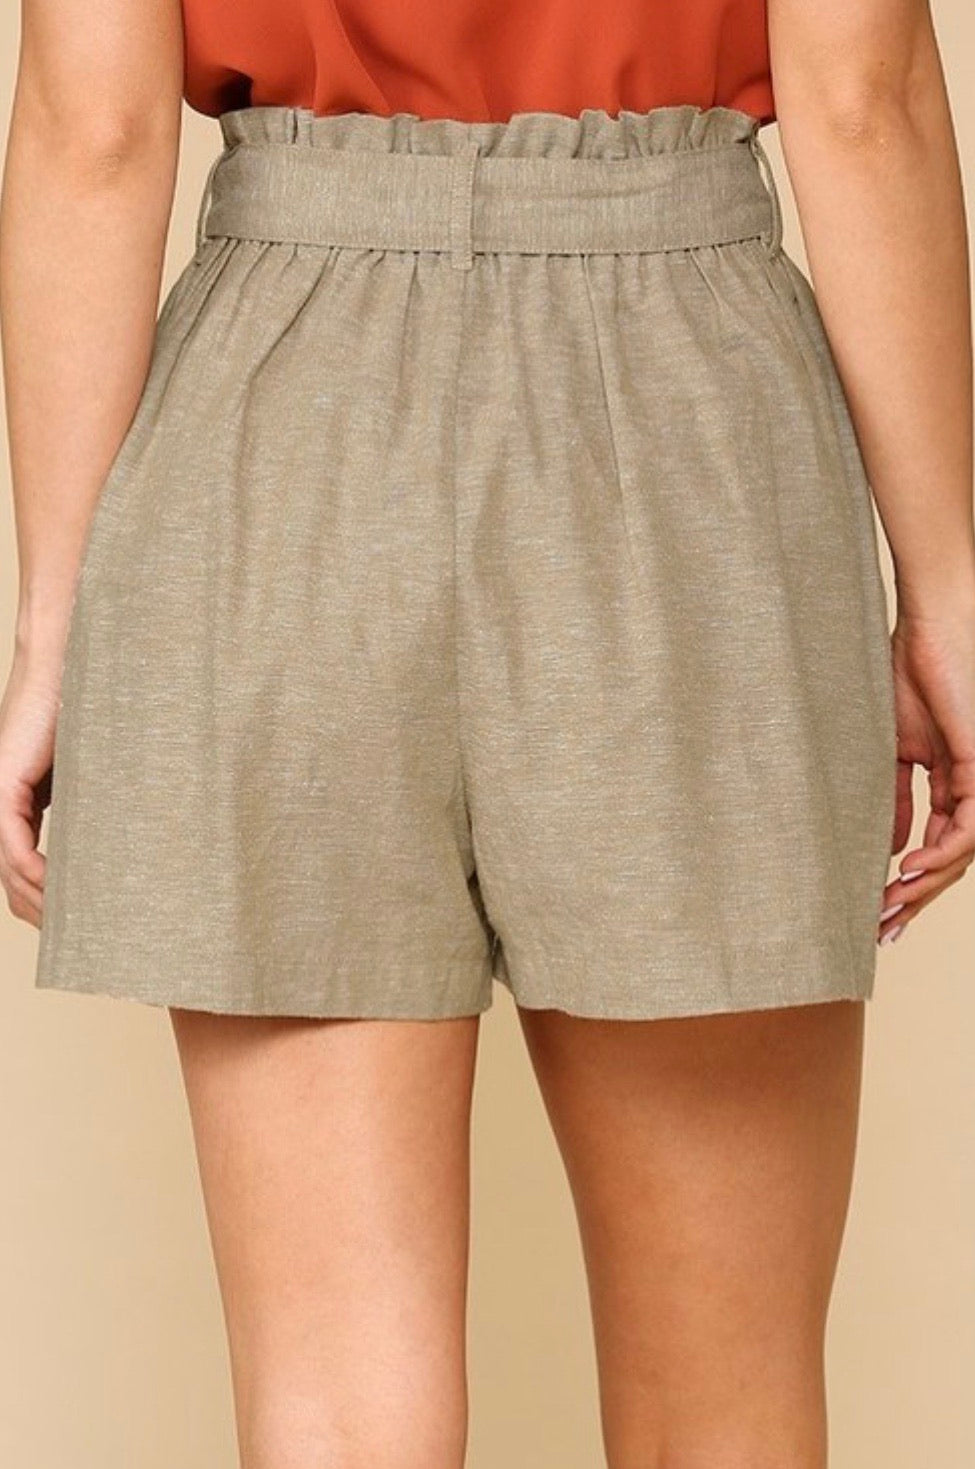 Shelley Denim Blue Paper Bag Shorts - Corinne an Affordable Women's Clothing Boutique in the US USA